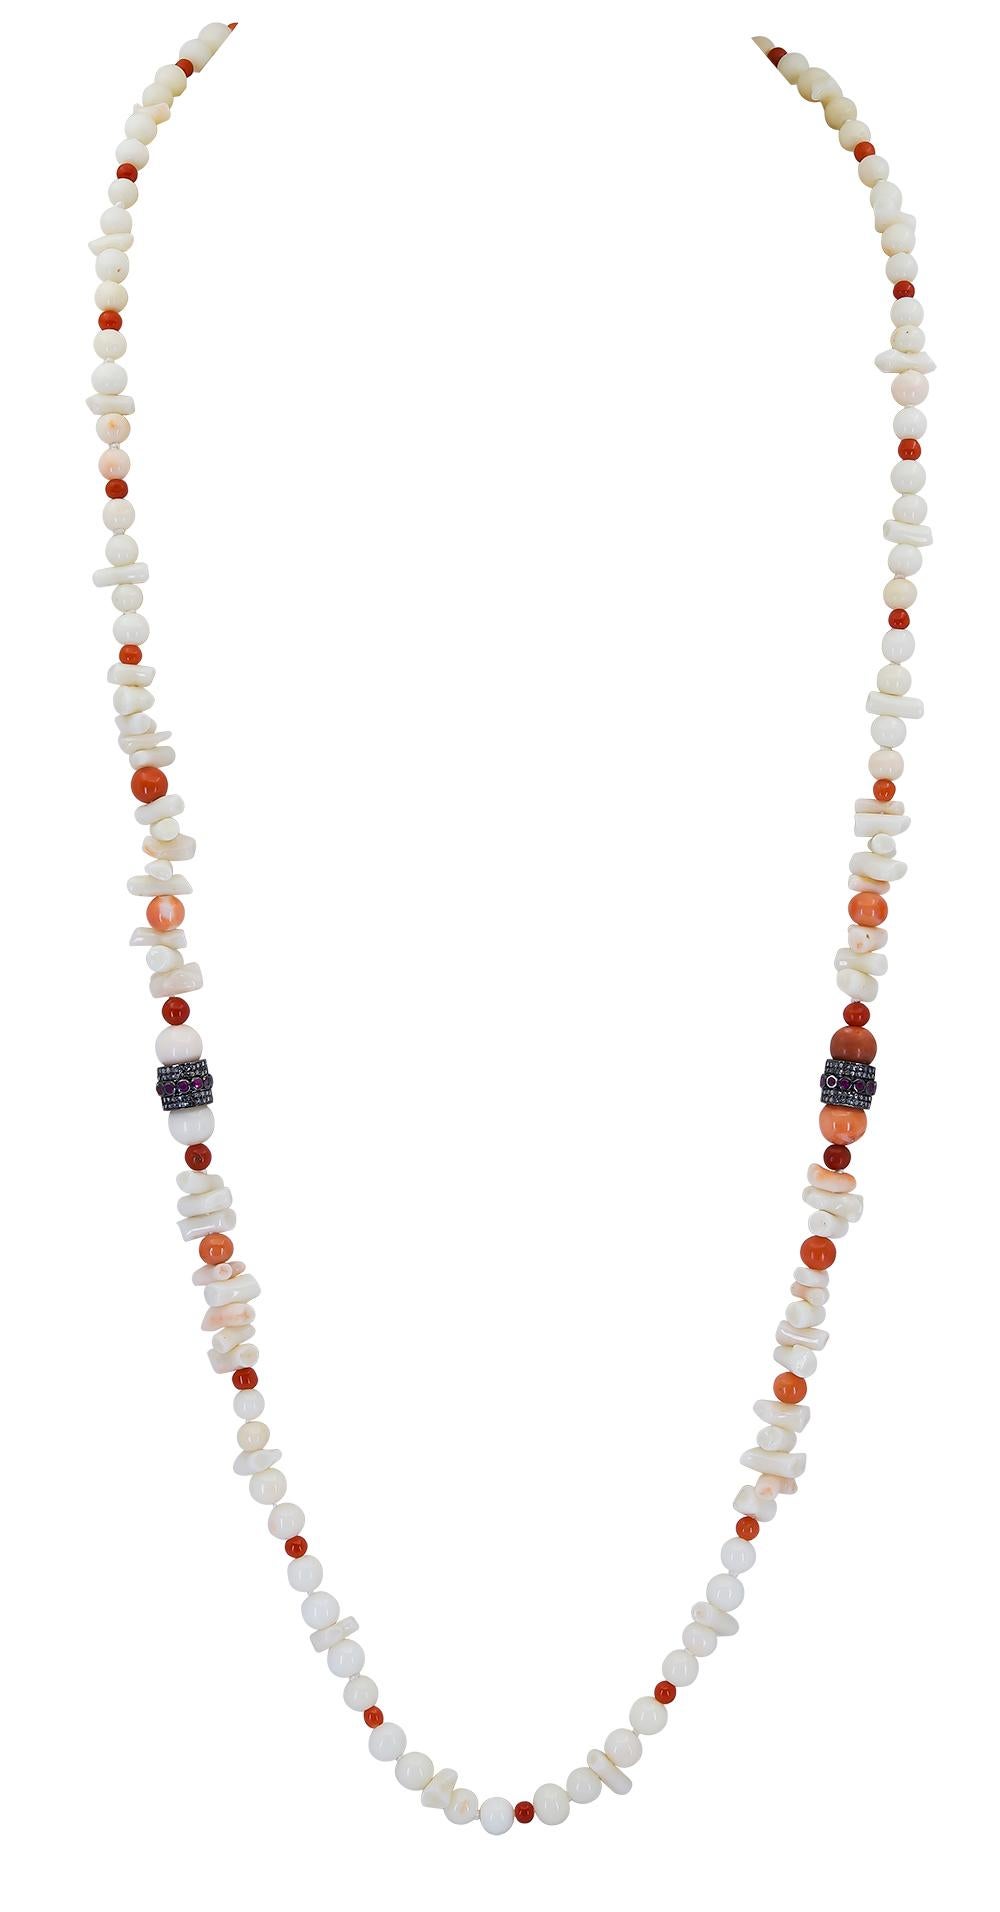 A 30 inch White and Red Coral Necklace with round coral beads that range in size from 3.5 mm - 8mm each. Accented with white irregular shape coral and 2 diamond rondelles.  
